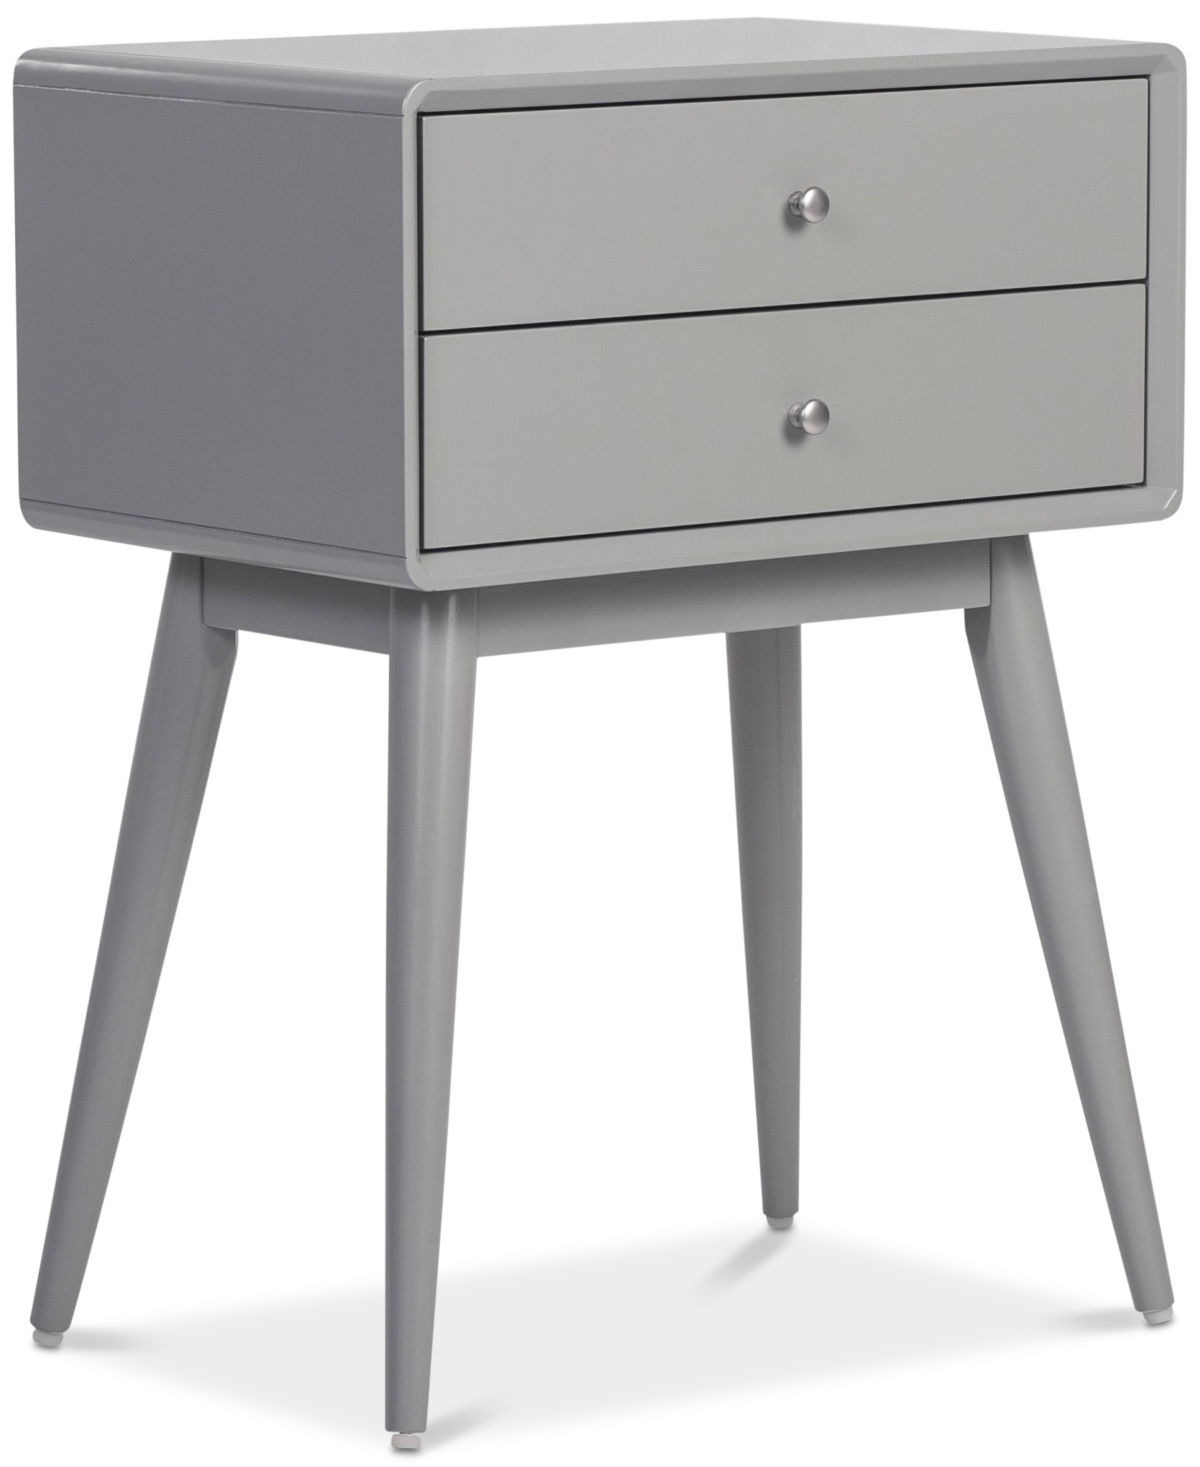 6190416 Elle Decor Rory 2-Drawer Side Table, Quick Ship sku 6190416